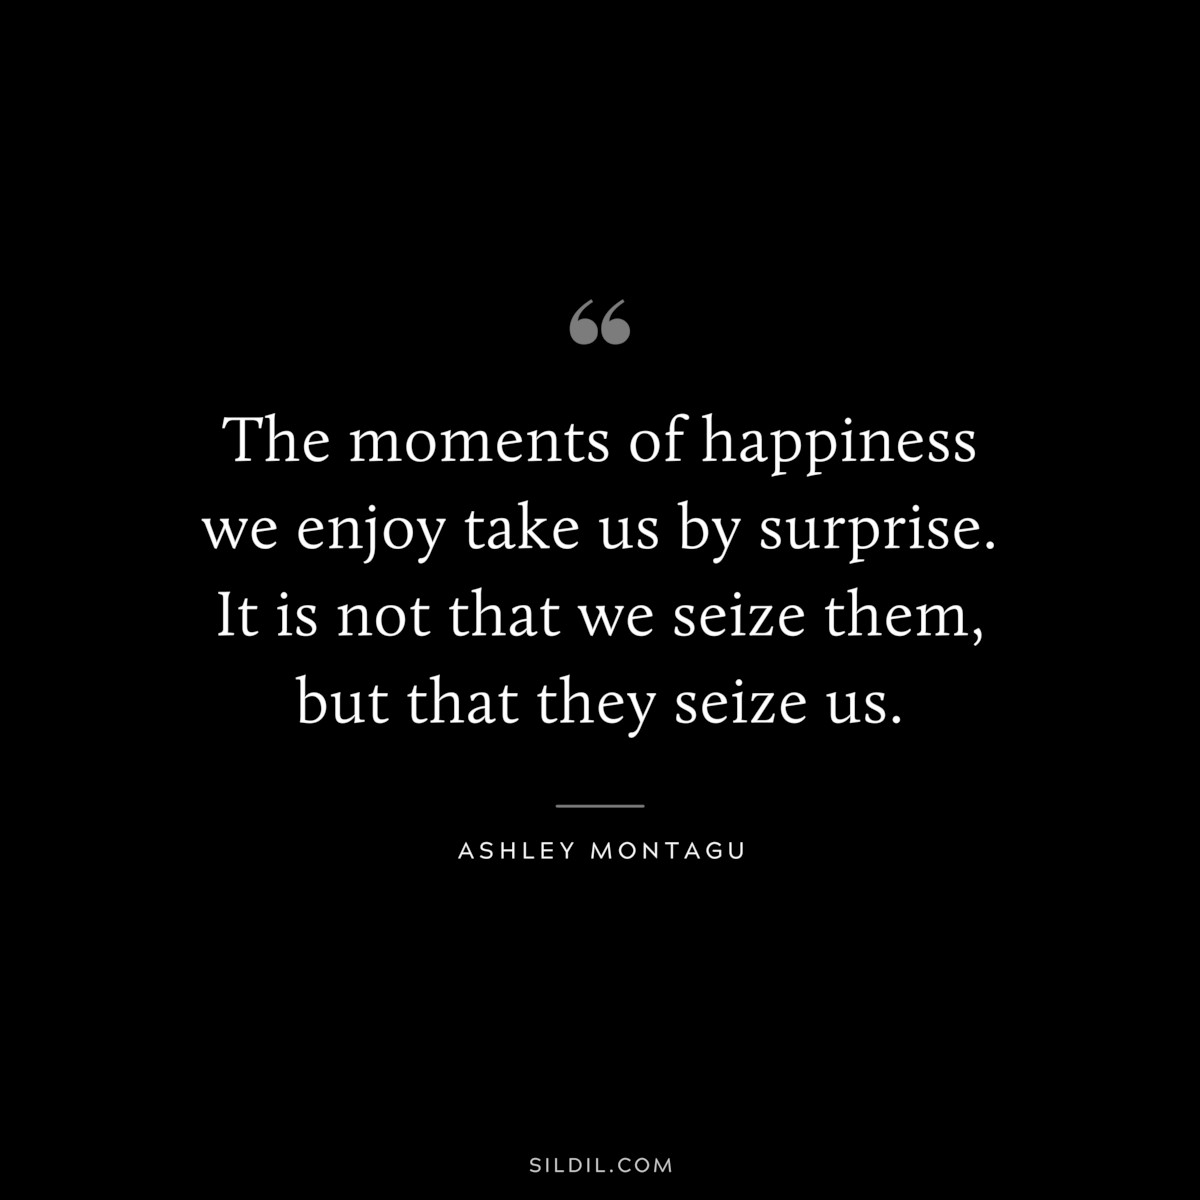 The moments of happiness we enjoy take us by surprise. It is not that we seize them, but that they seize us. ― Ashley Montagu